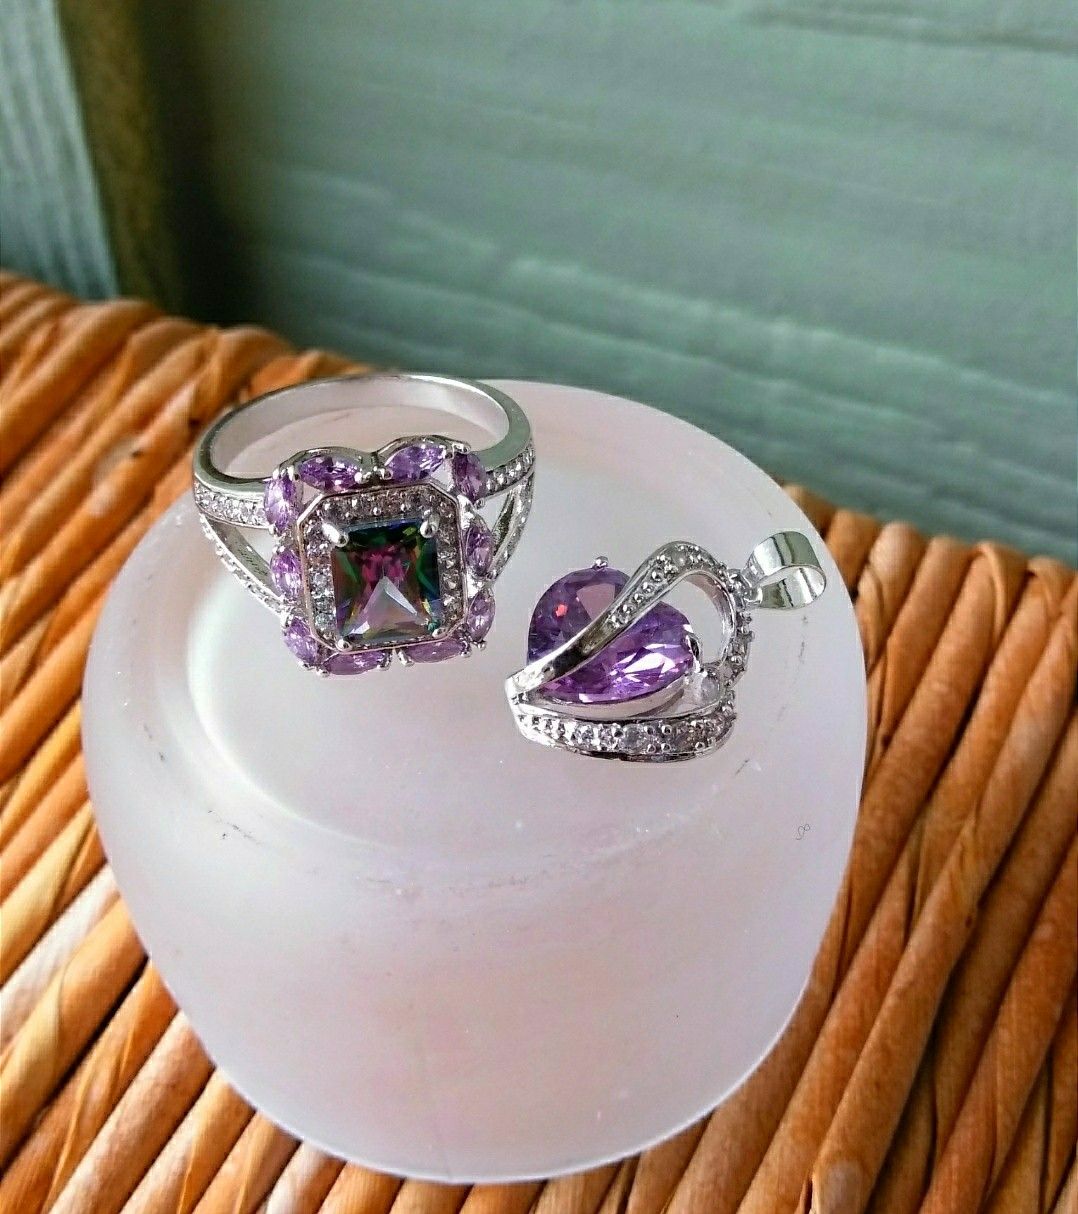 New. Gift Set: Mystic Topaz Ring and Purple Heart Necklace. Ring-Sz 9